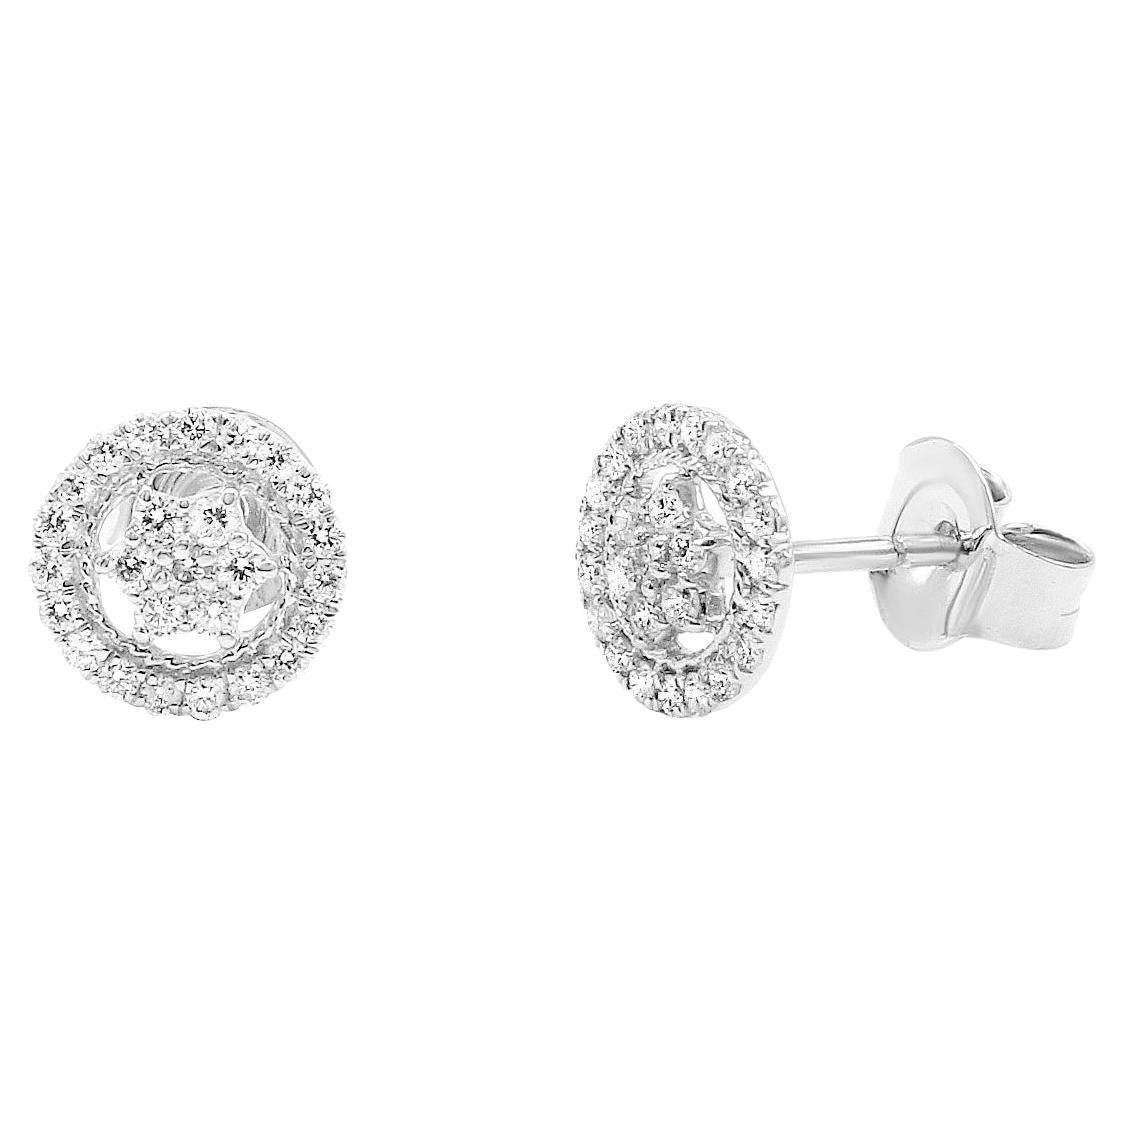 Halo Star Diamond Earrings 14K White, Yellow, and Rose Gold